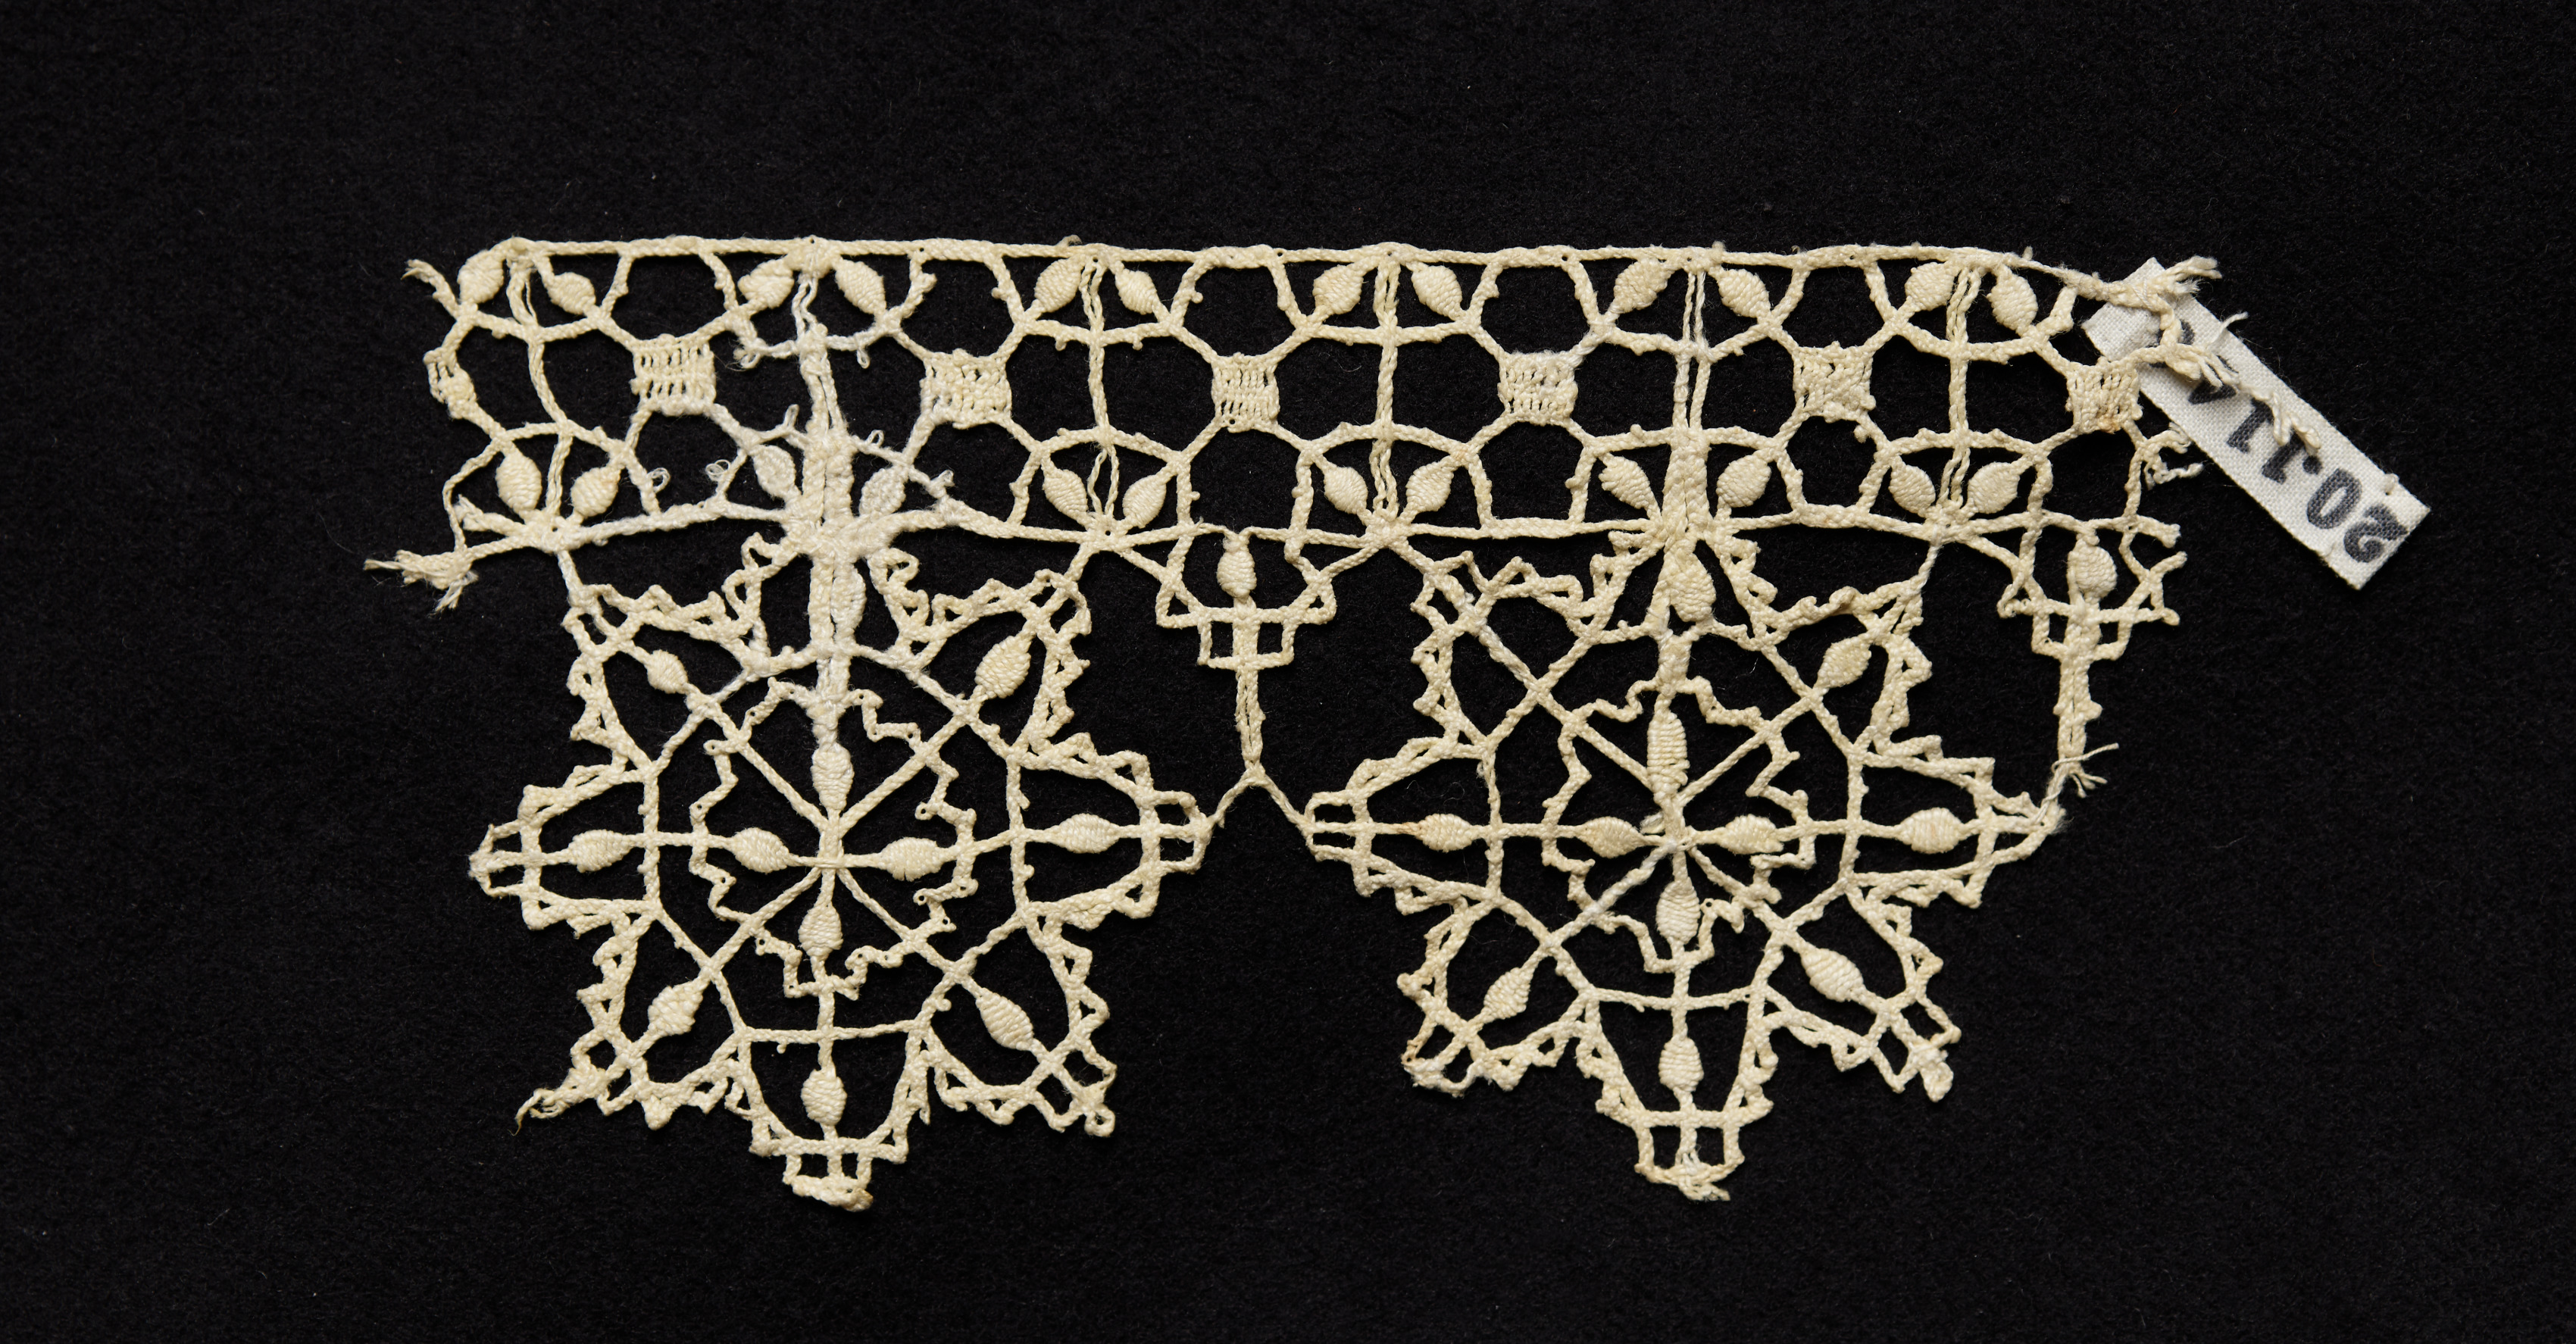 Bobbin Lace (Needlepoint Design) Edging of Star Points